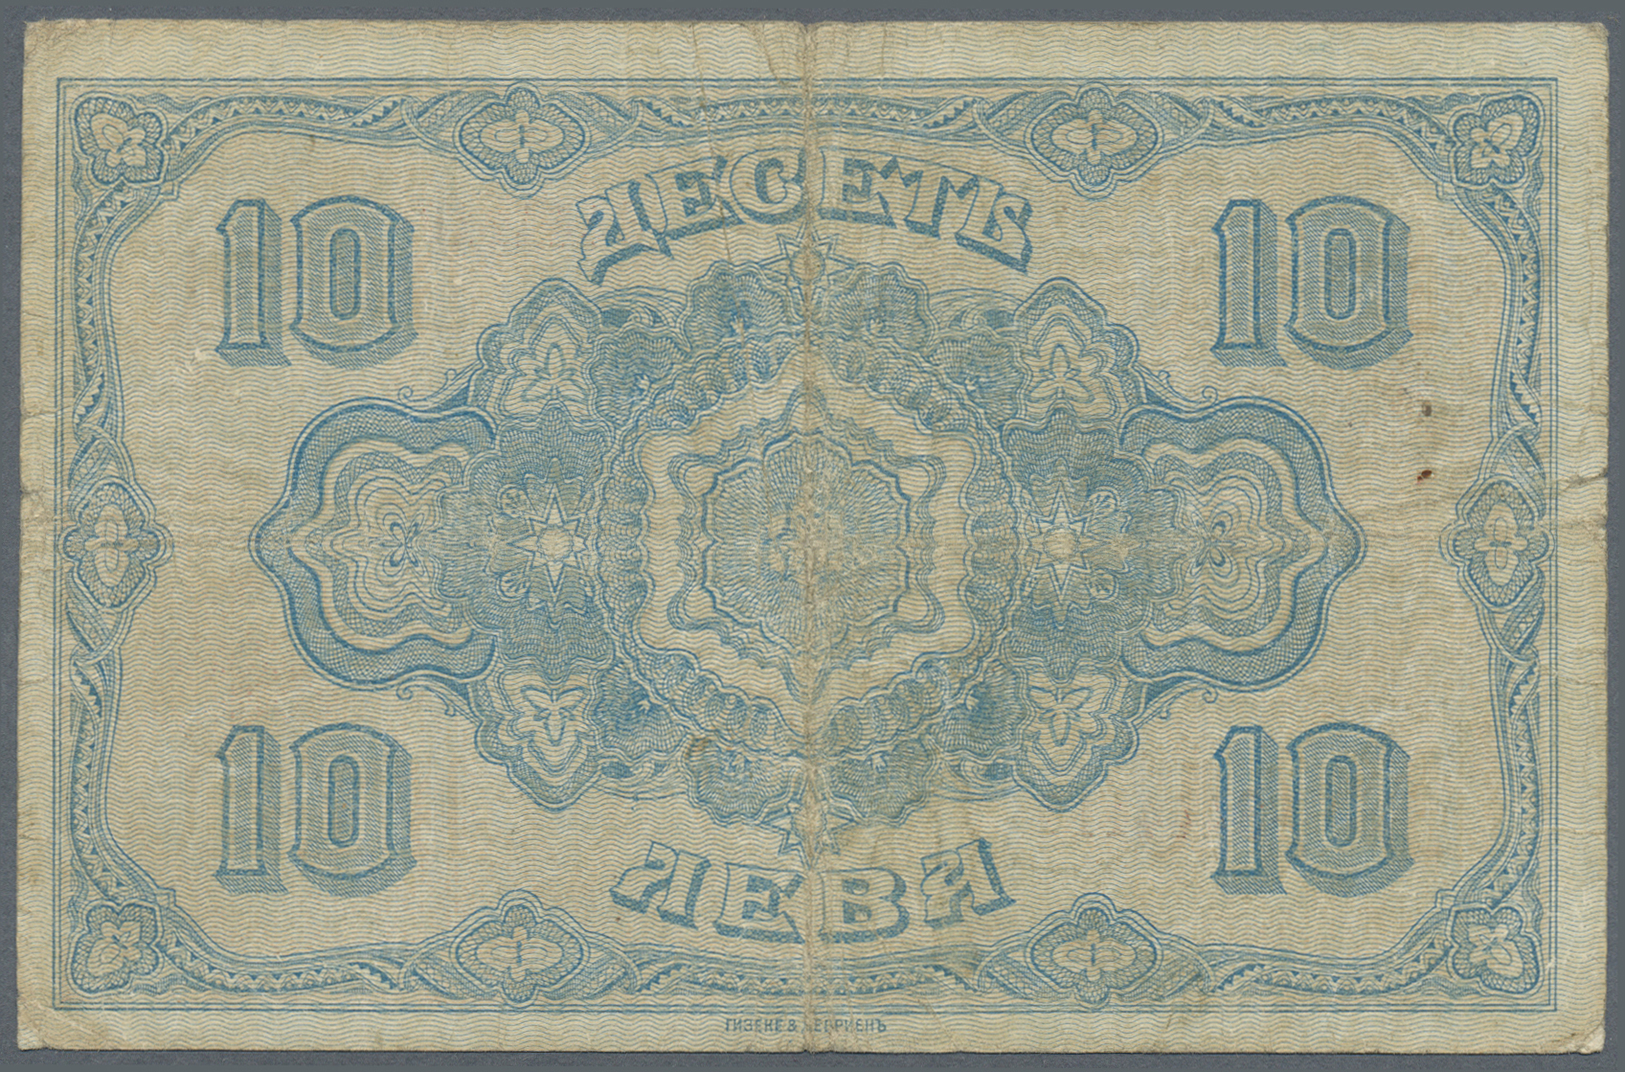 00385 Bulgaria / Bulgarien: 10 Leva ND(1917) P. 22a With Color Print Error, While The Original Note Is Printed In Brown, - Bulgarie